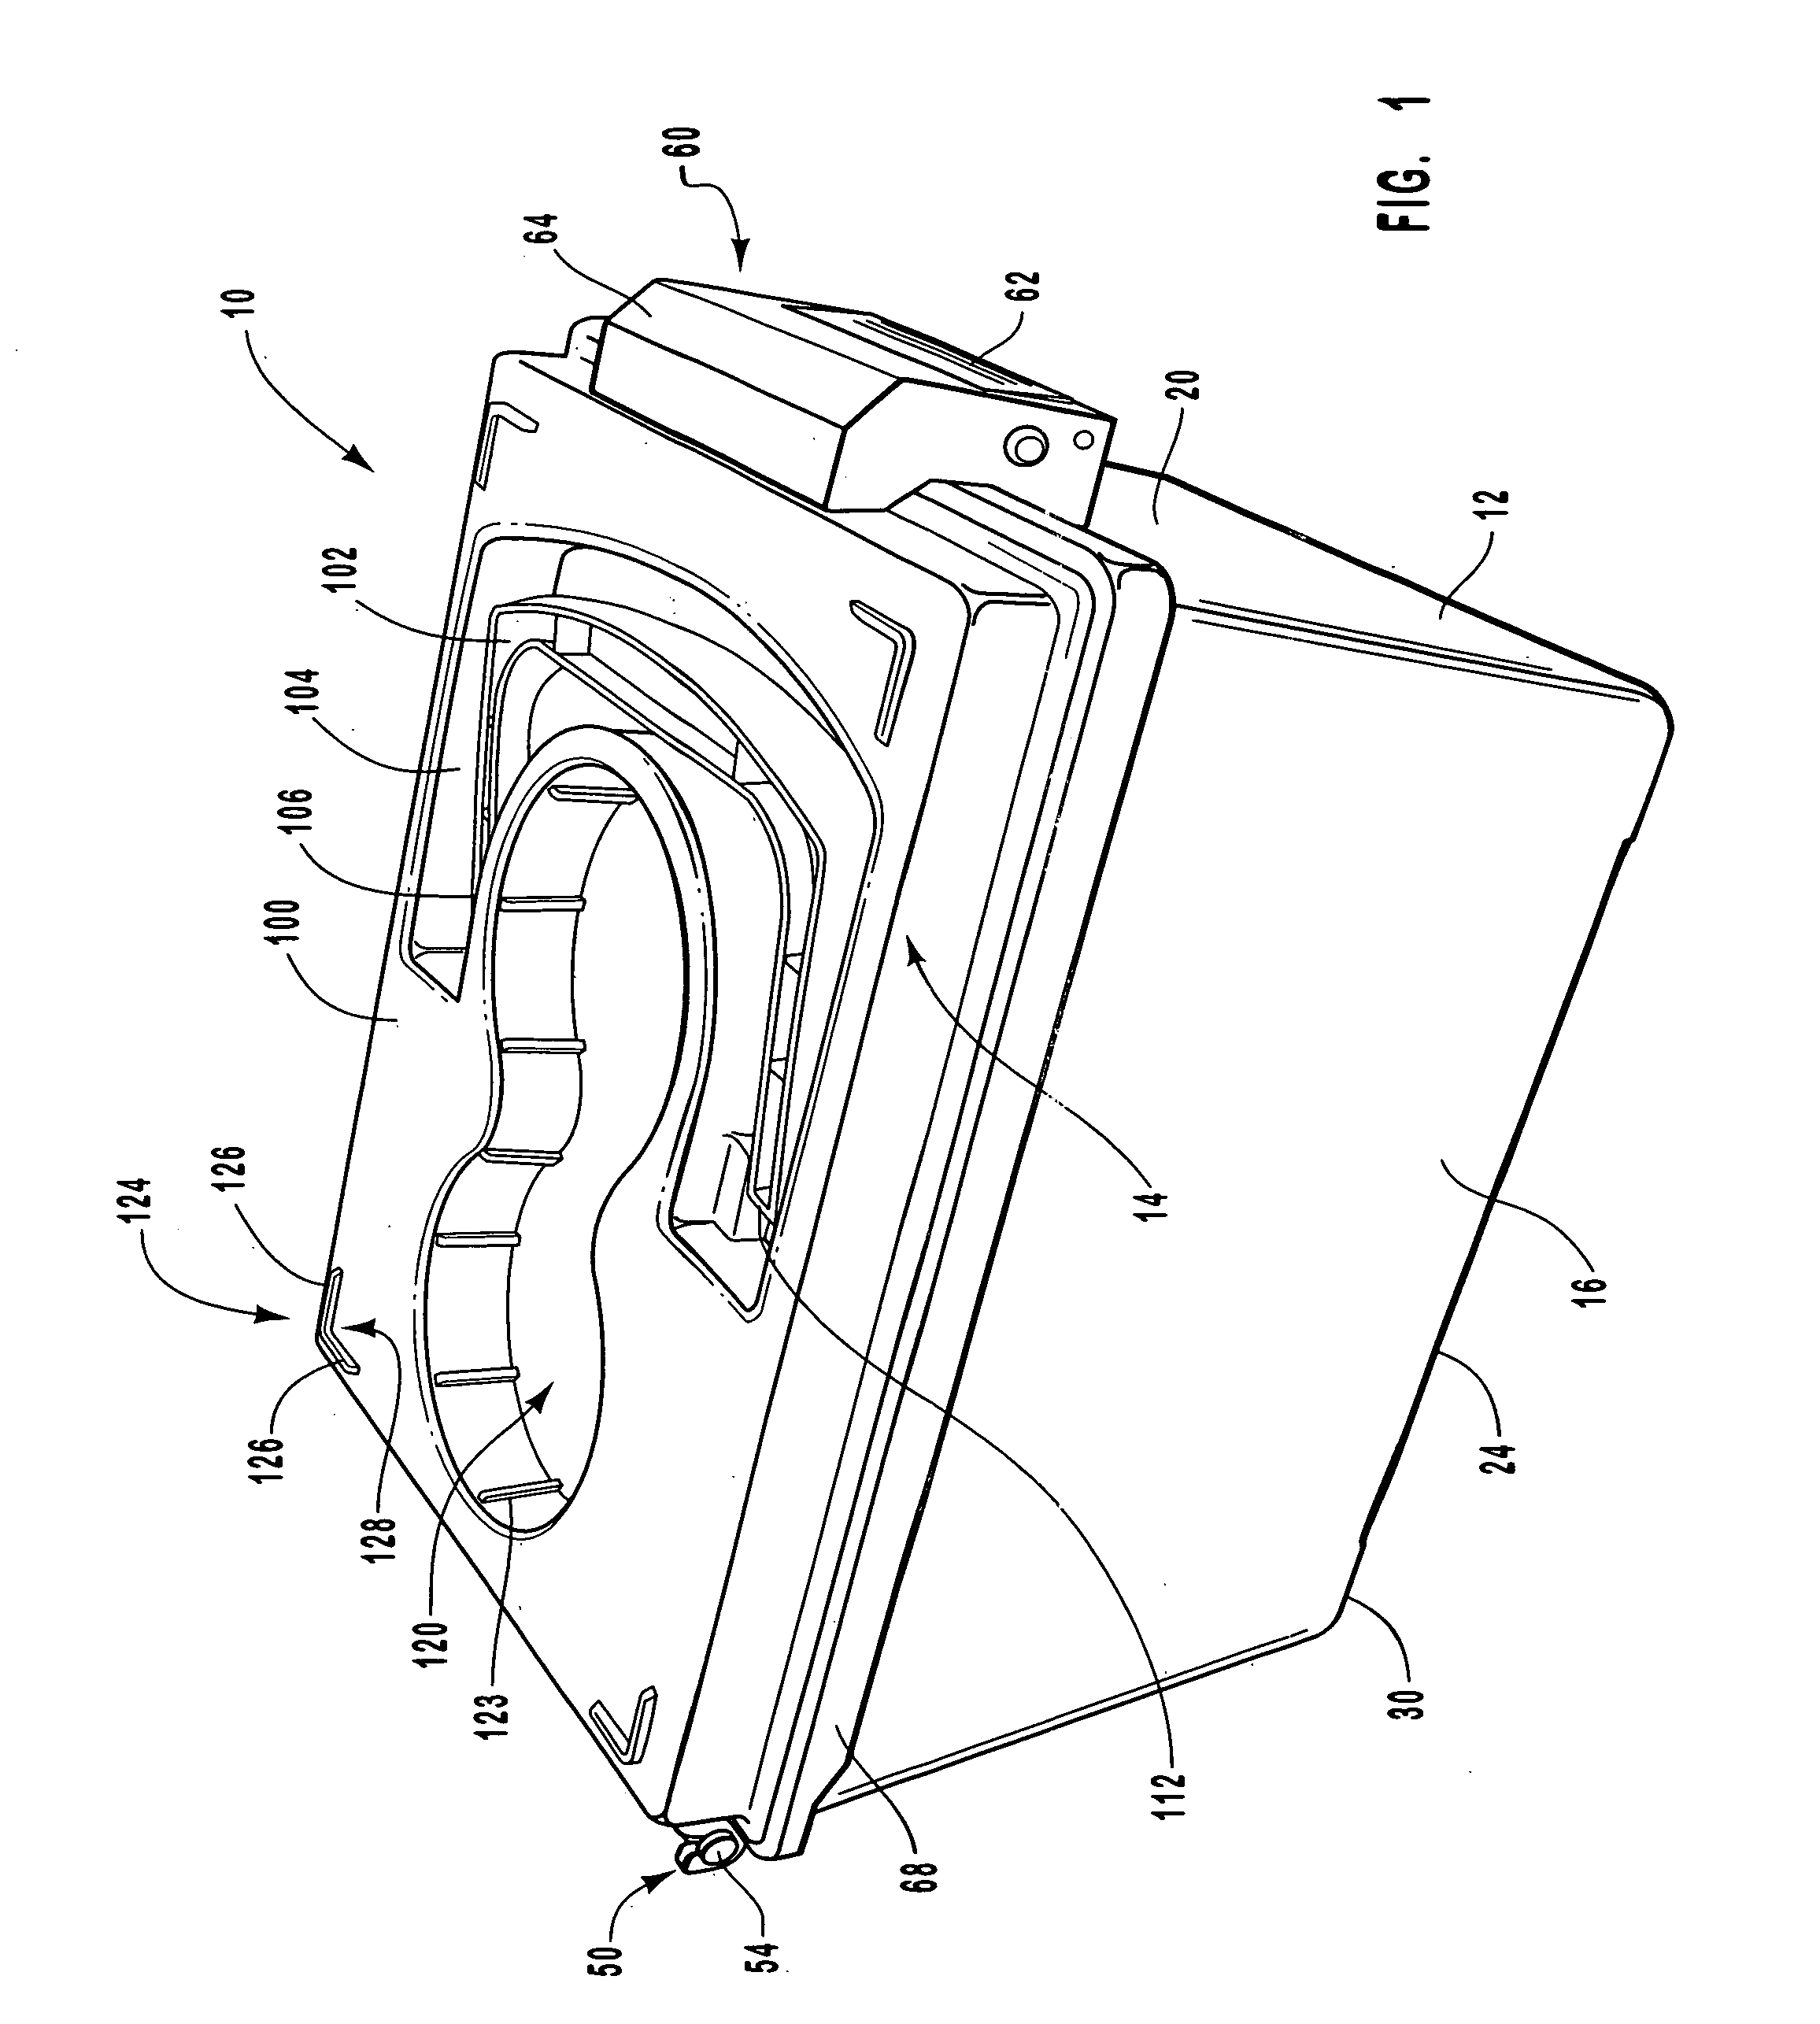 Container for portable heating equipment